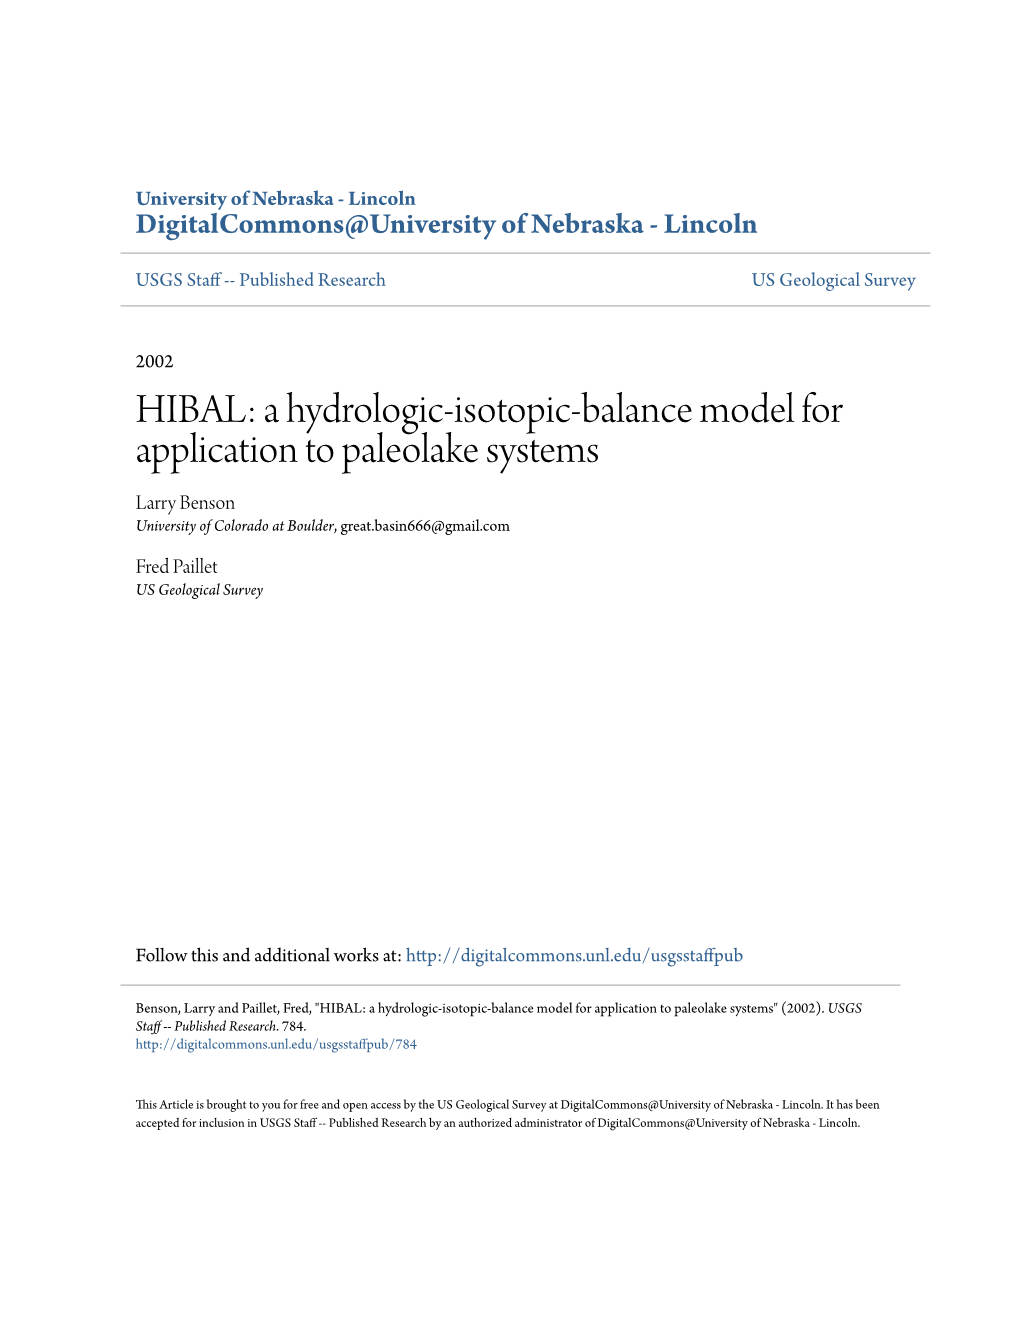 A Hydrologic-Isotopic-Balance Model for Application to Paleolake Systems Larry Benson University of Colorado at Boulder, Great.Basin666@Gmail.Com